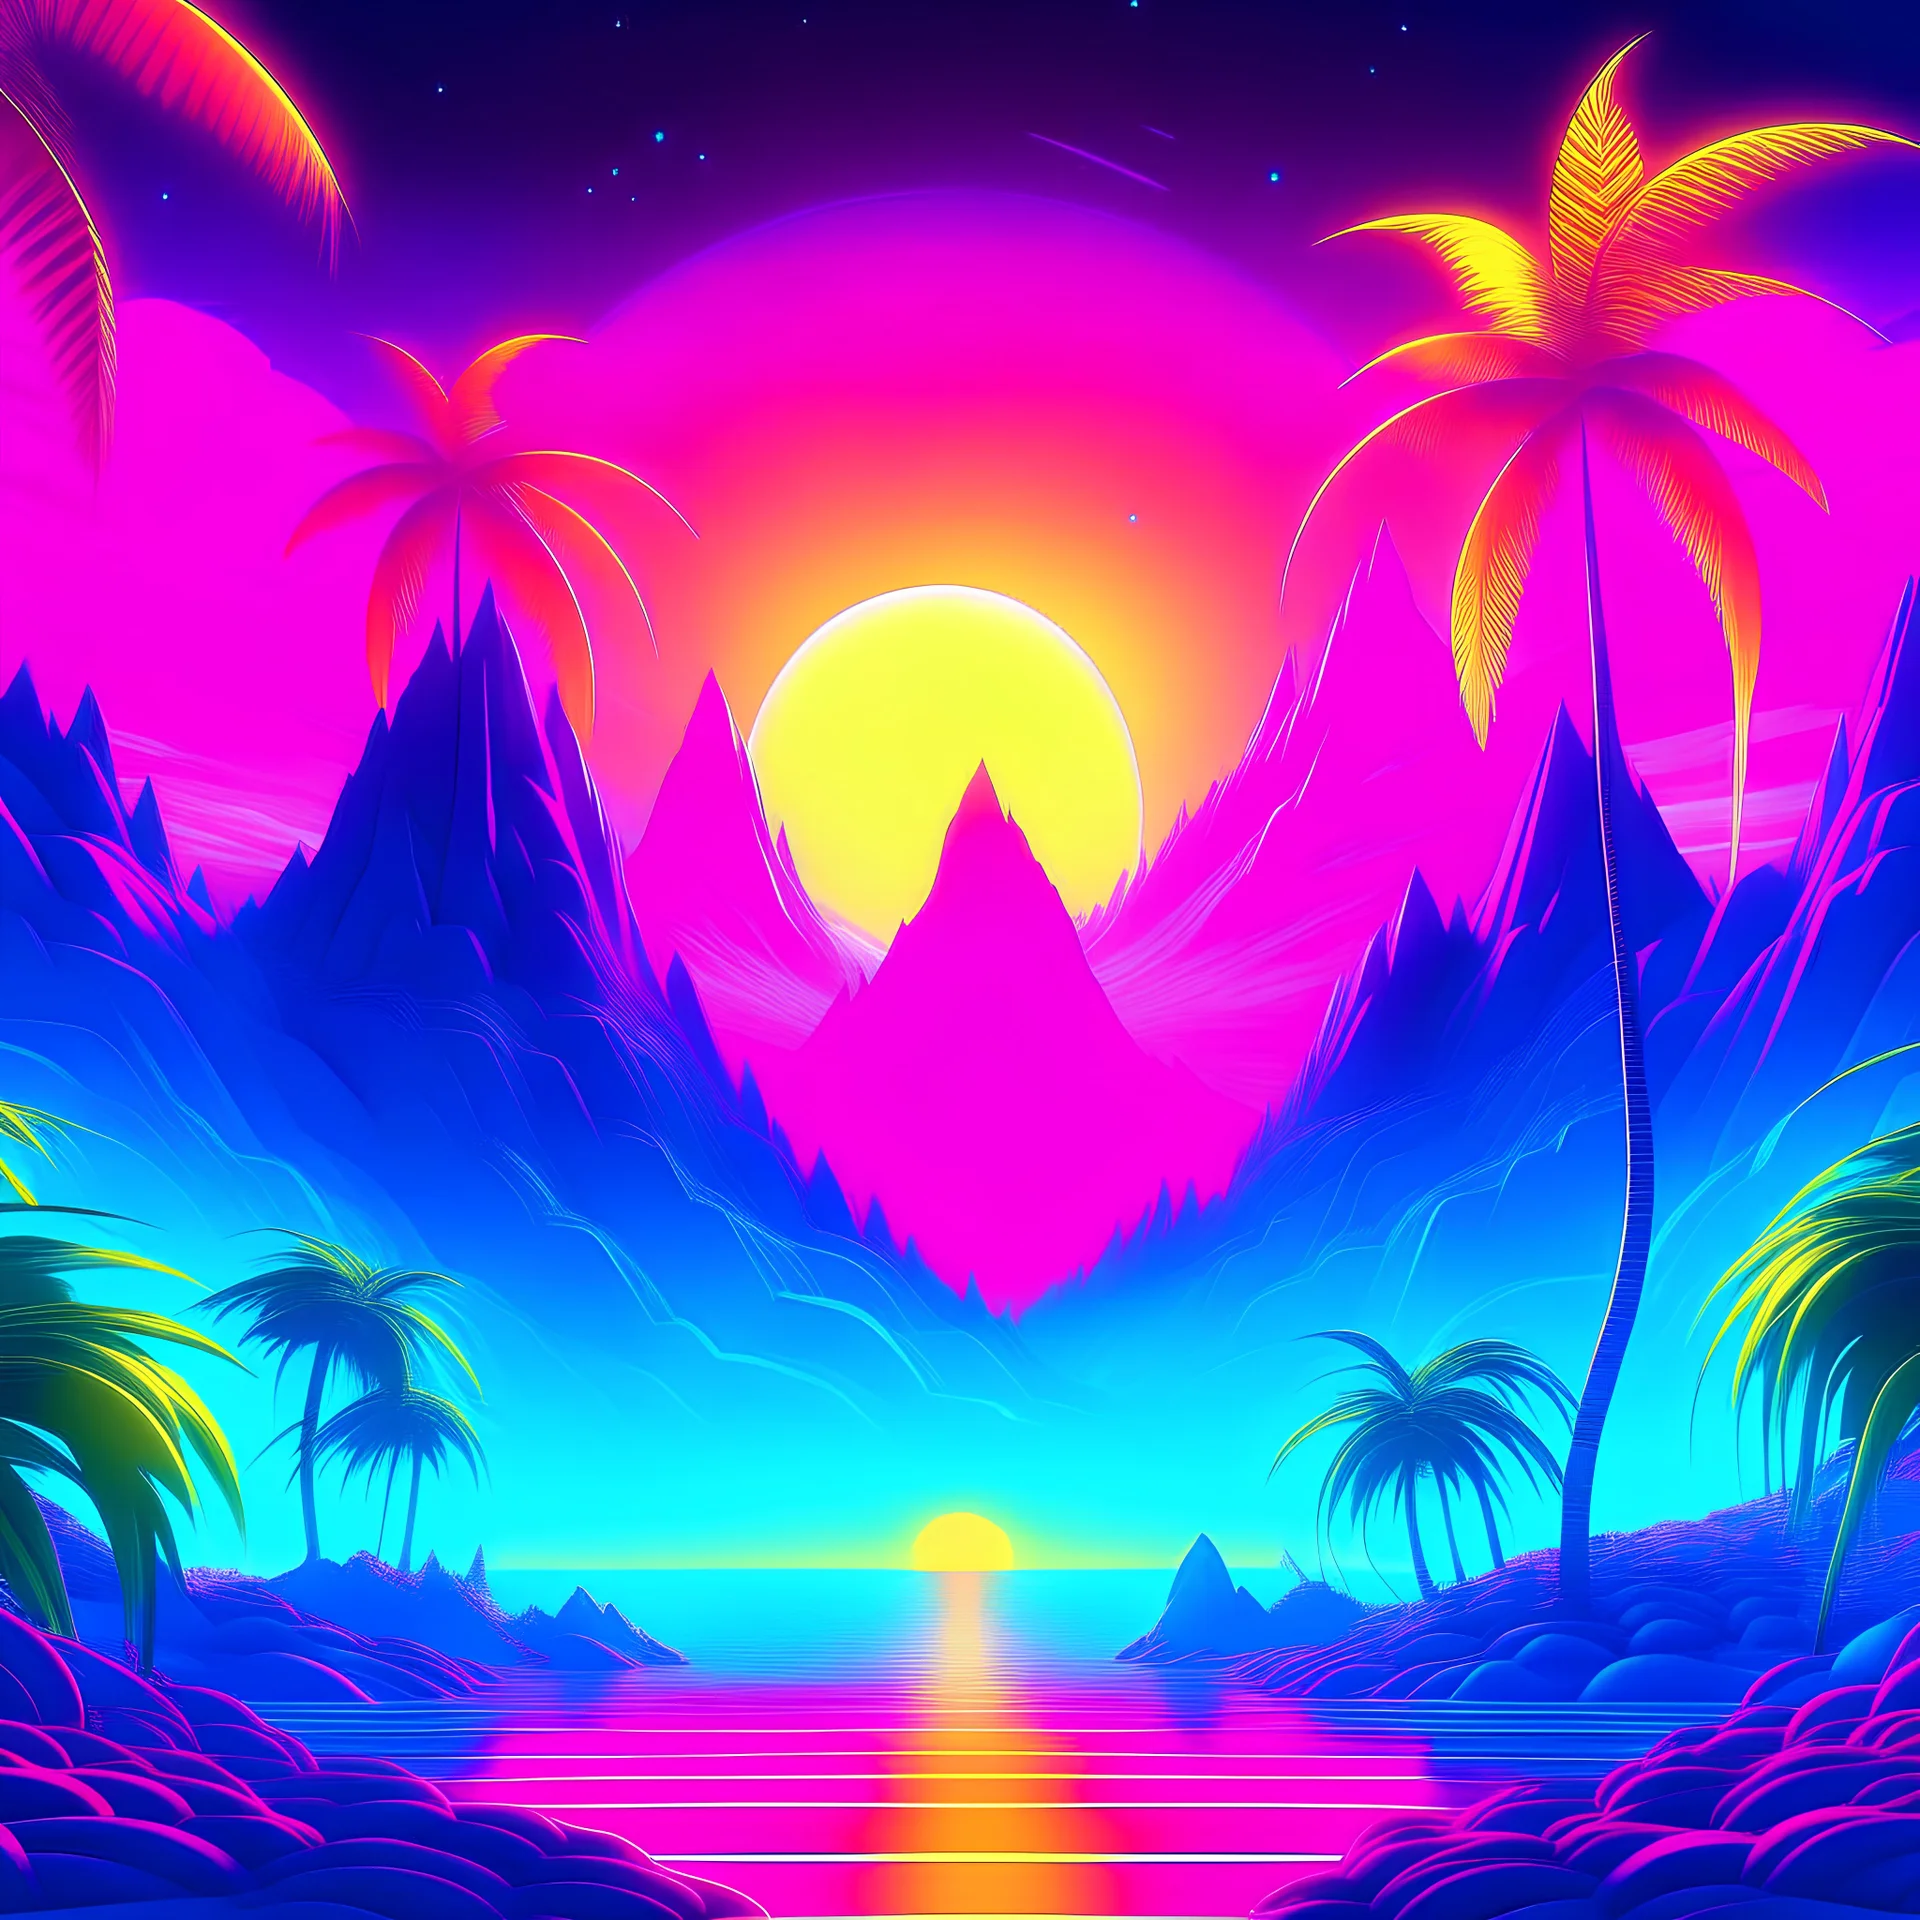 the bbok of eden , vaporwave pictures style, with neon lights and the sun far away